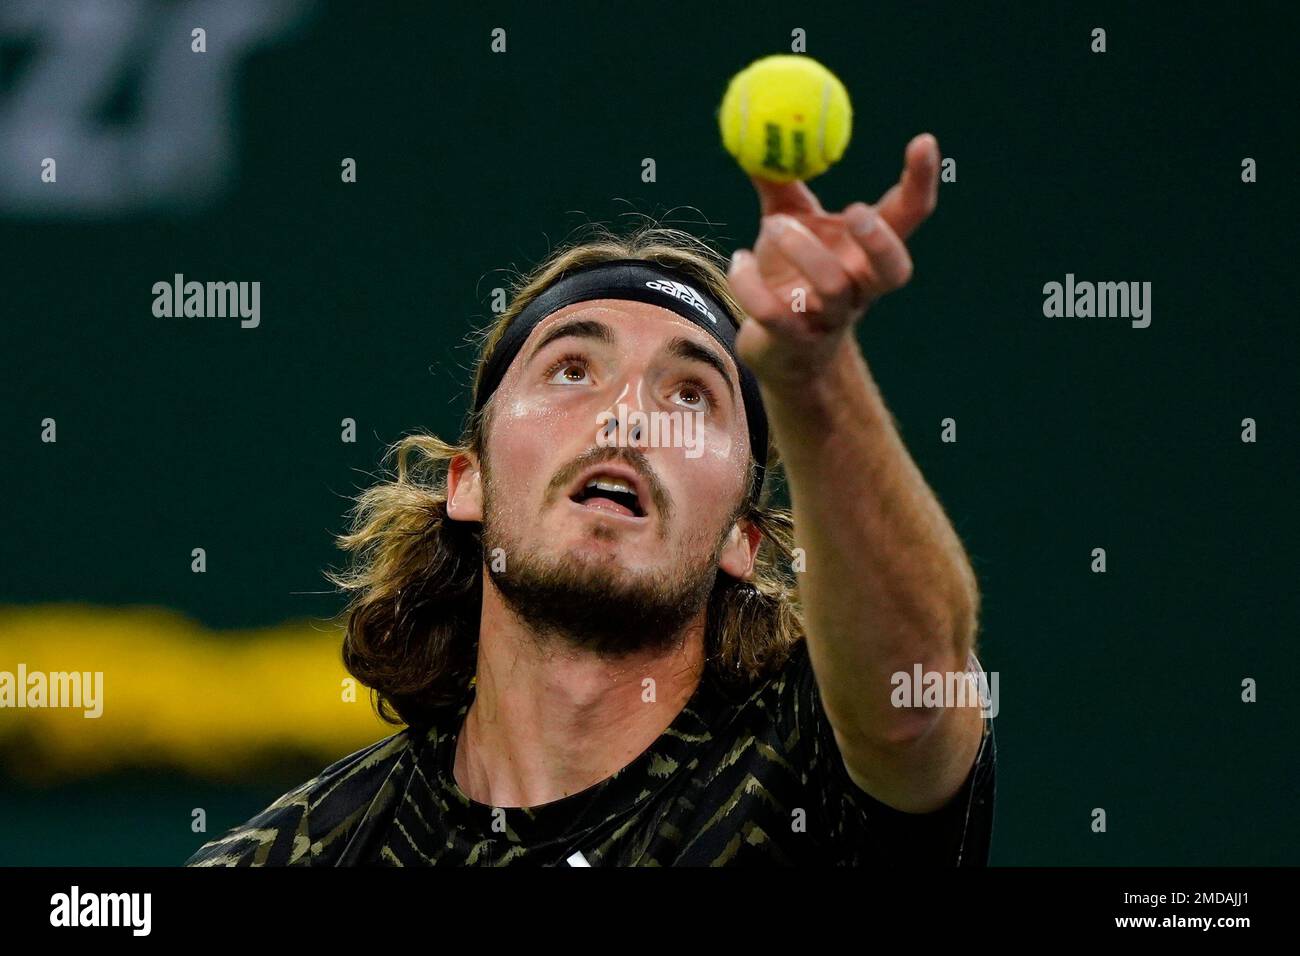 Stefanos Tsitsipas, of Greece, serves to Fabio Fognini, of Italy, at the  BNP Paribas Open tennis tournament Tuesday, Oct. 12, 2021, in Indian Wells,  Calif. (AP Photo/Mark J. Terrill Stock Photo - Alamy